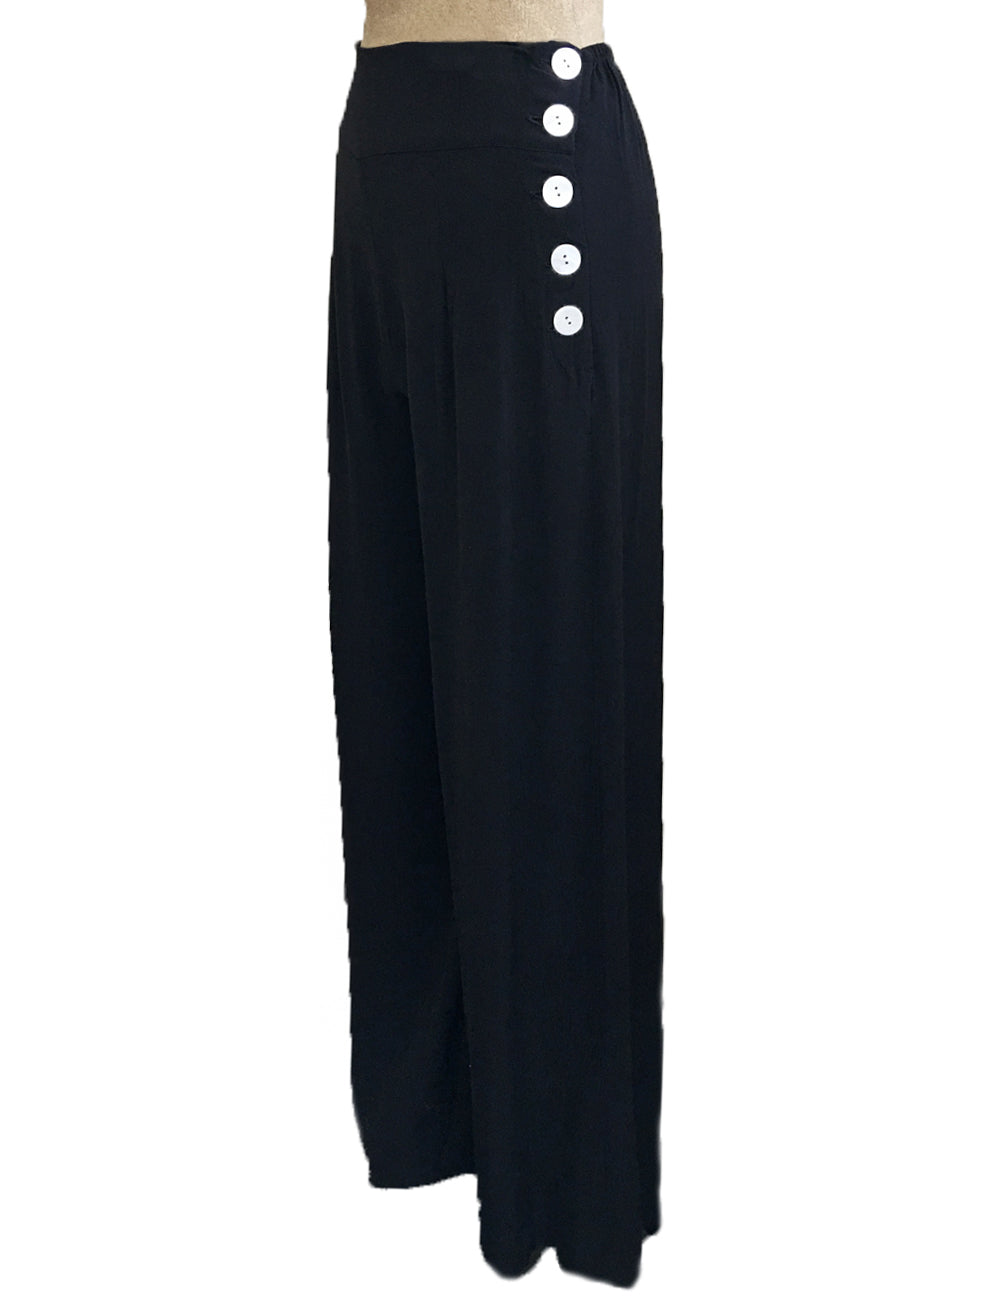 Solid Black Retro 1940s Style High Waisted Palazzo Pants